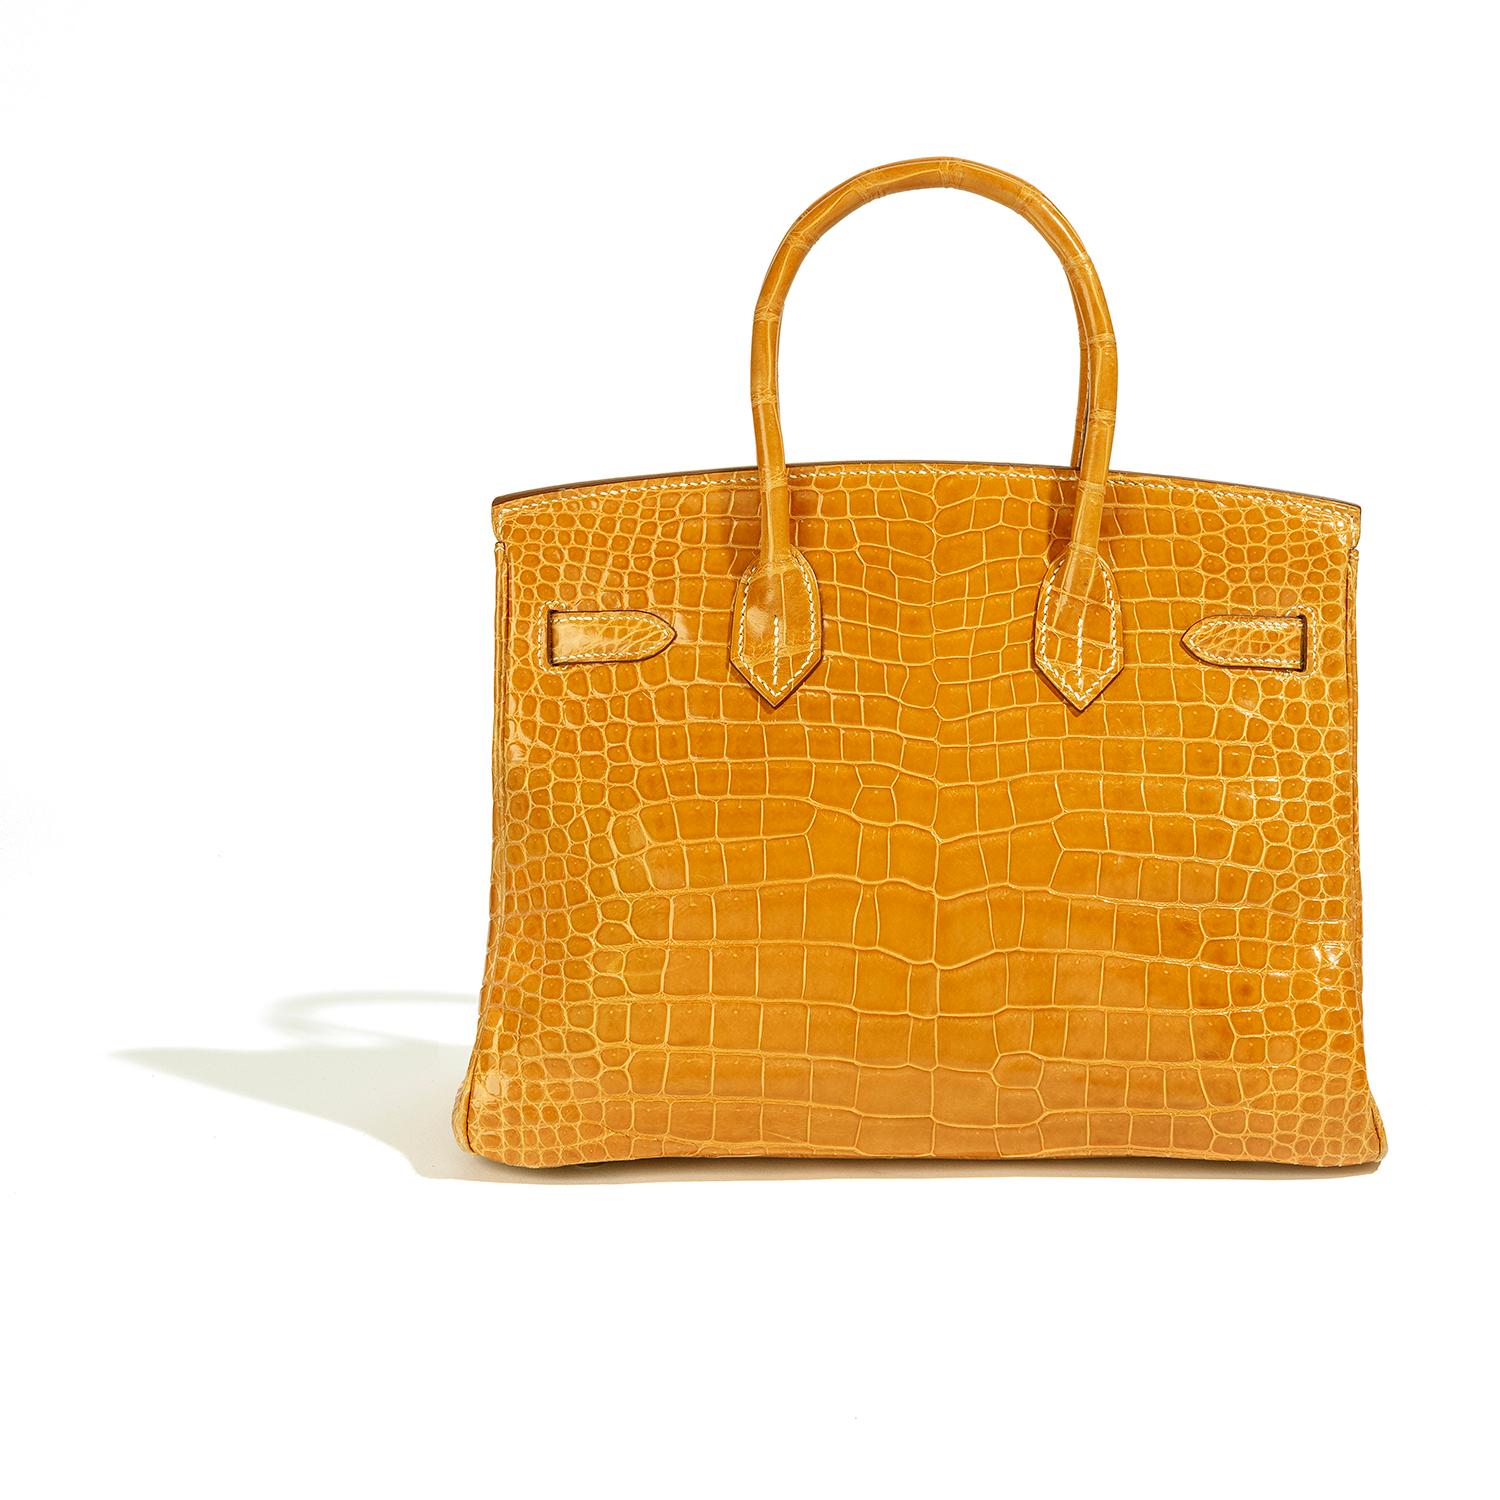 This exquisite Hermès bag is a true work of art, crafted with the finest quality yellow leather and adorned with breathtaking diamond-encrusted white-gold hardware. The golden diamond clasp is a showstopper, weighing 106.68 g of luxurious white gold